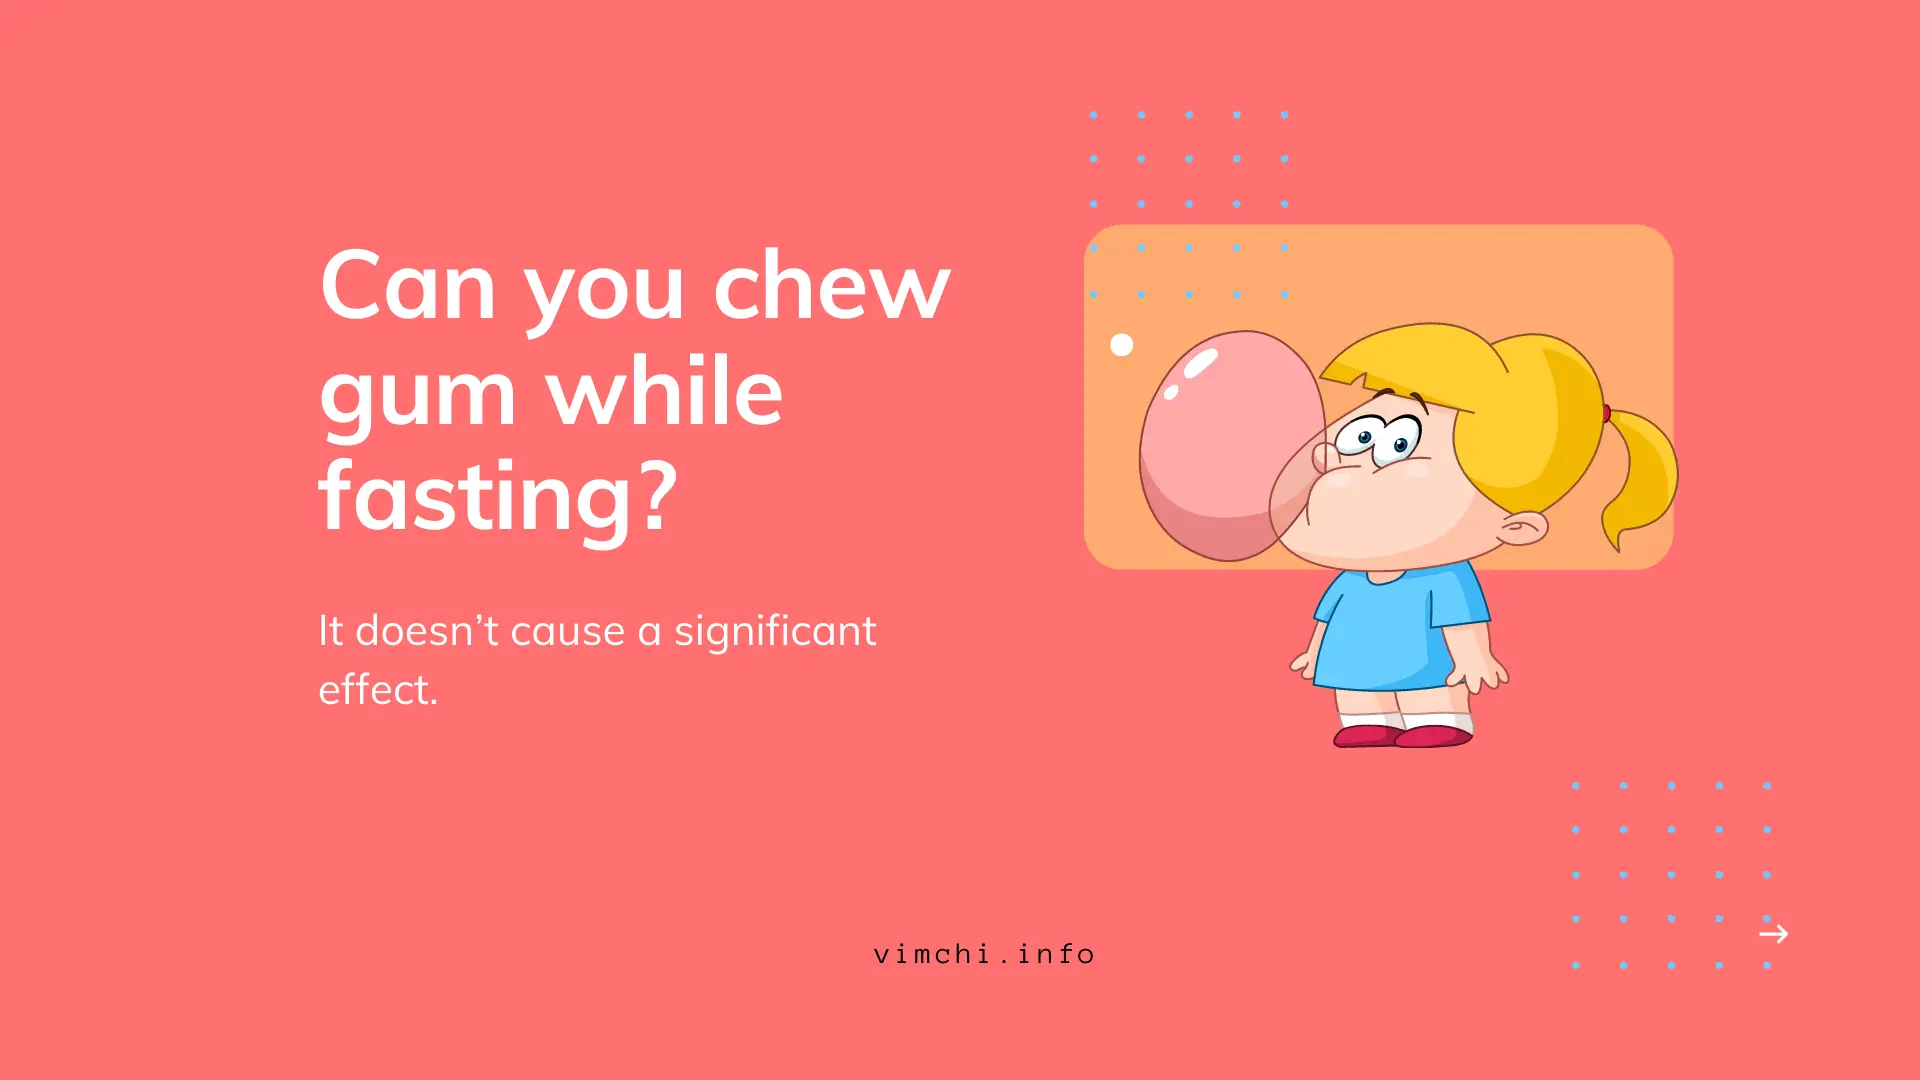 Can you chew gum while fasting